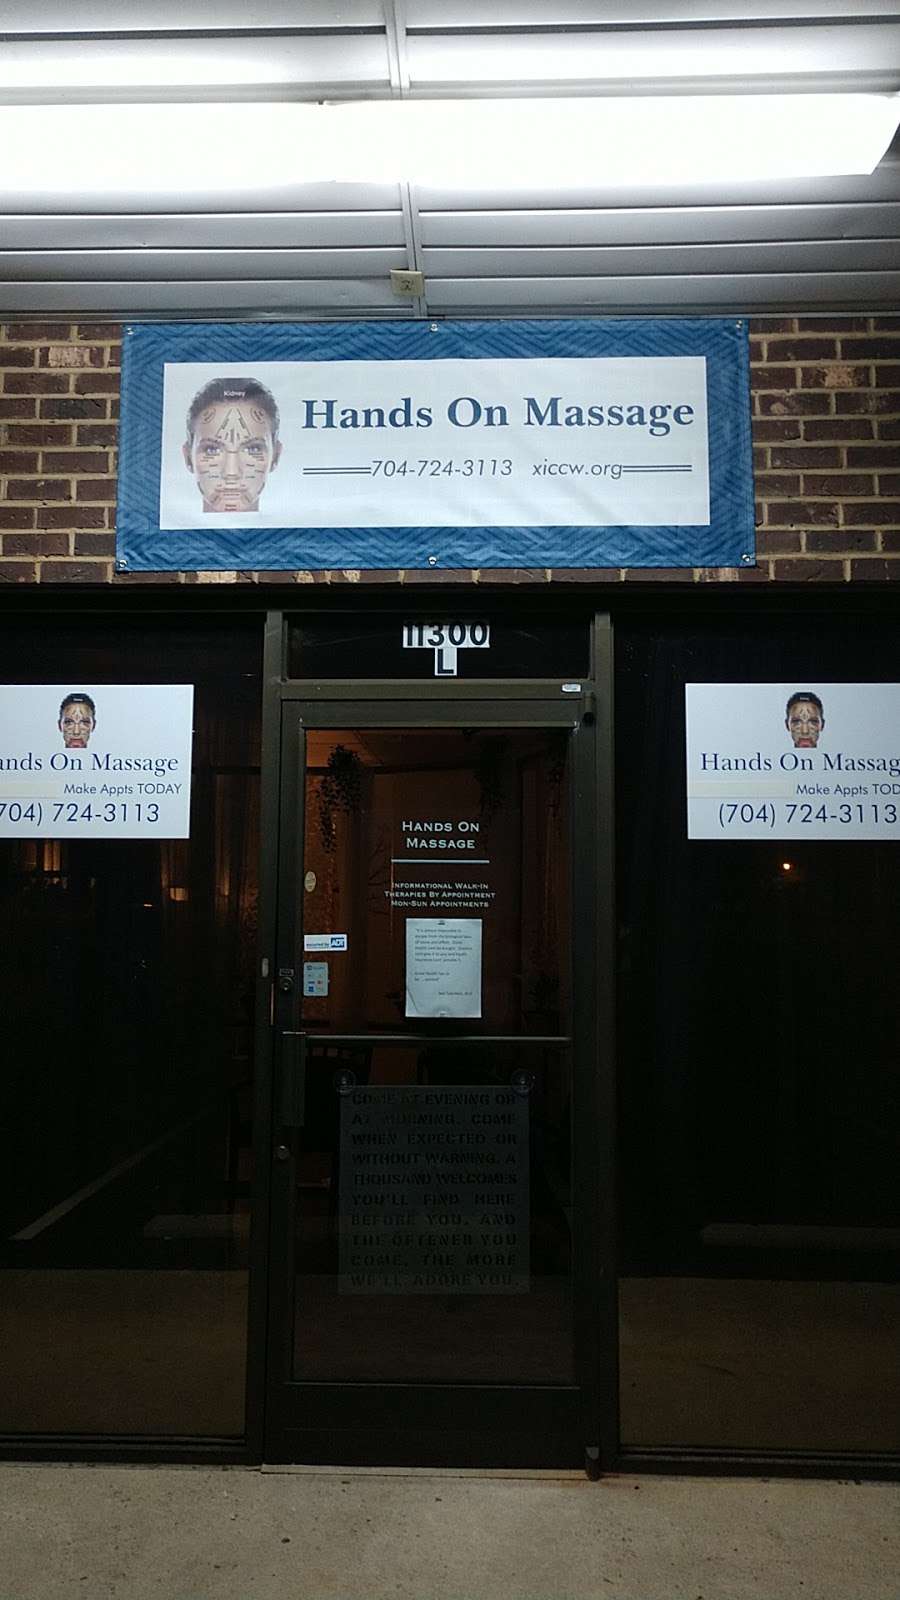 Hands On with Corrective Care Wellness | 11300 - L, Lawyers Rd, Mint Hill, NC 28227 | Phone: (704) 724-3113